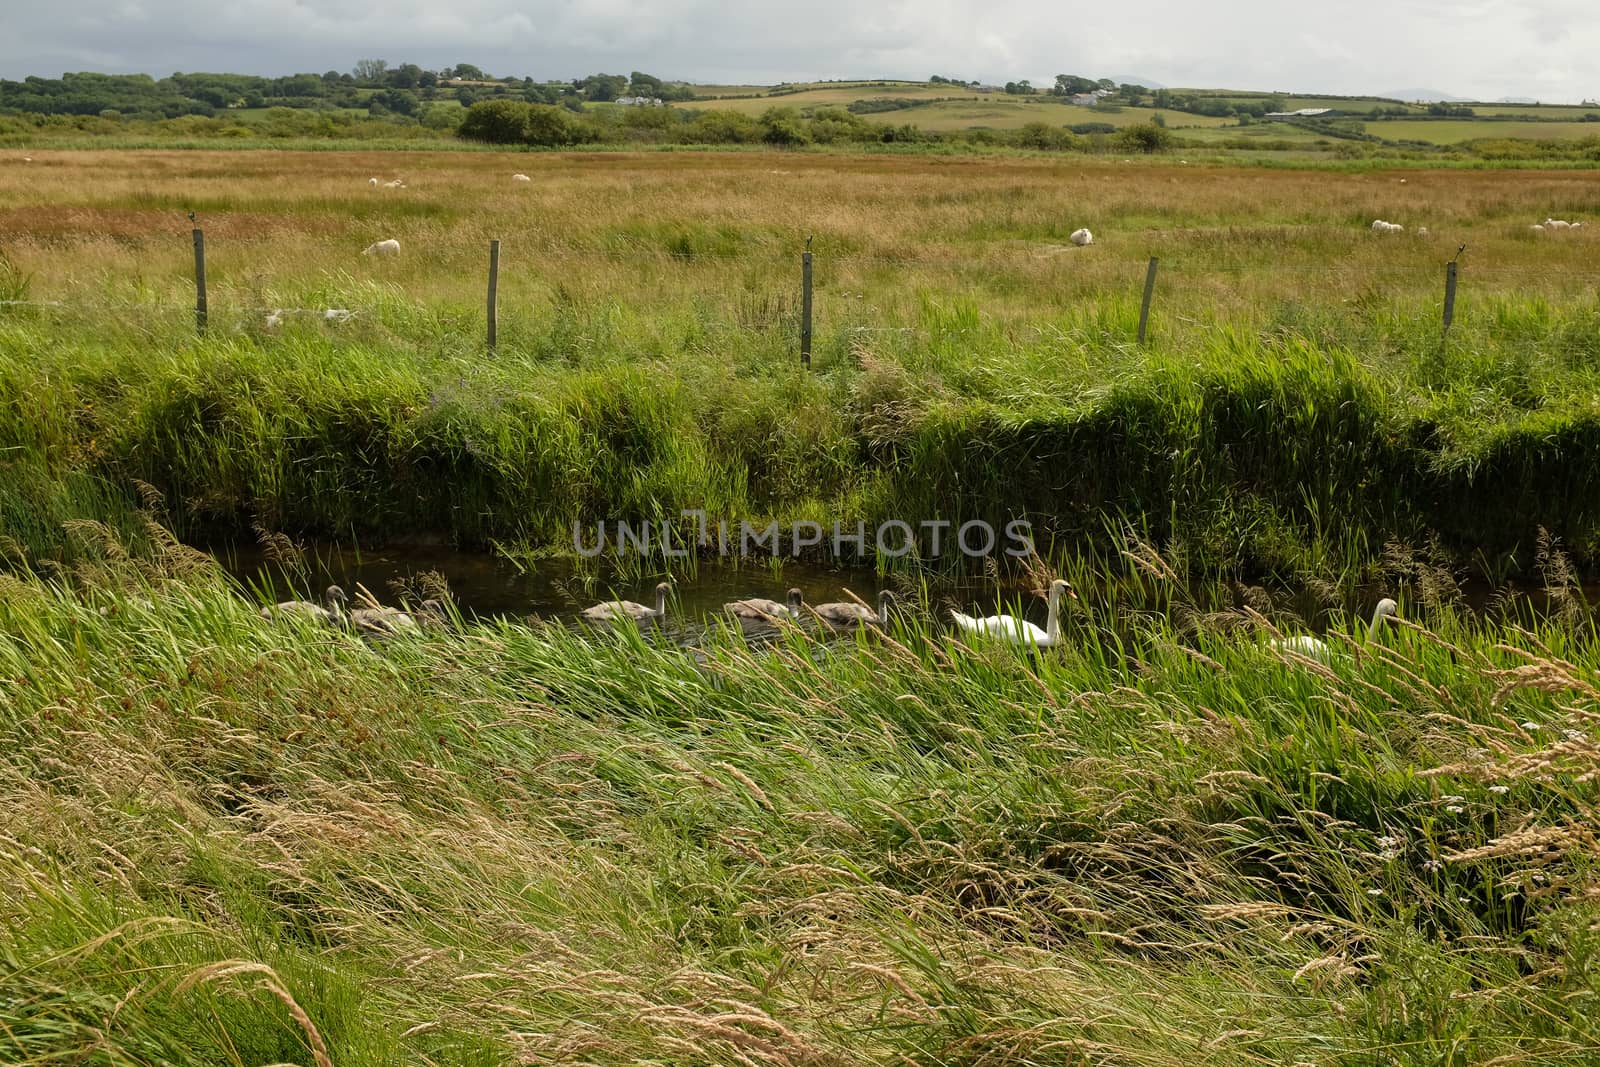 A marsh landscape with reeds and a river with swans and cygnets leading to a field with sheep.